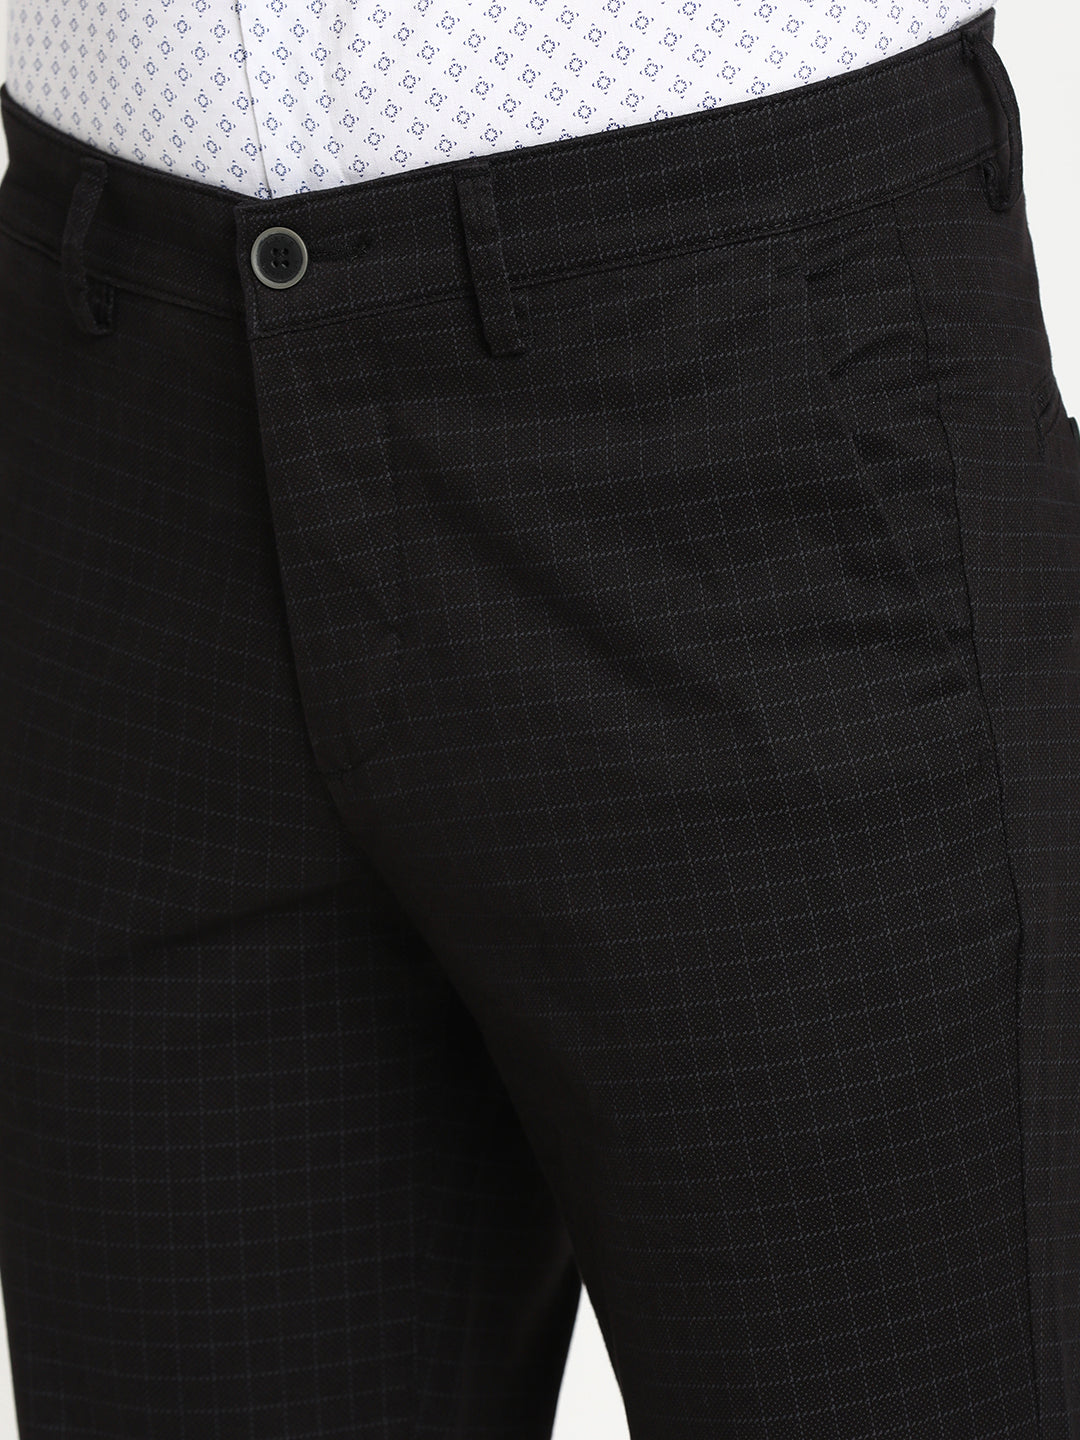 Cotton Stretch Black Checked Ultra Slim Fit Trouser